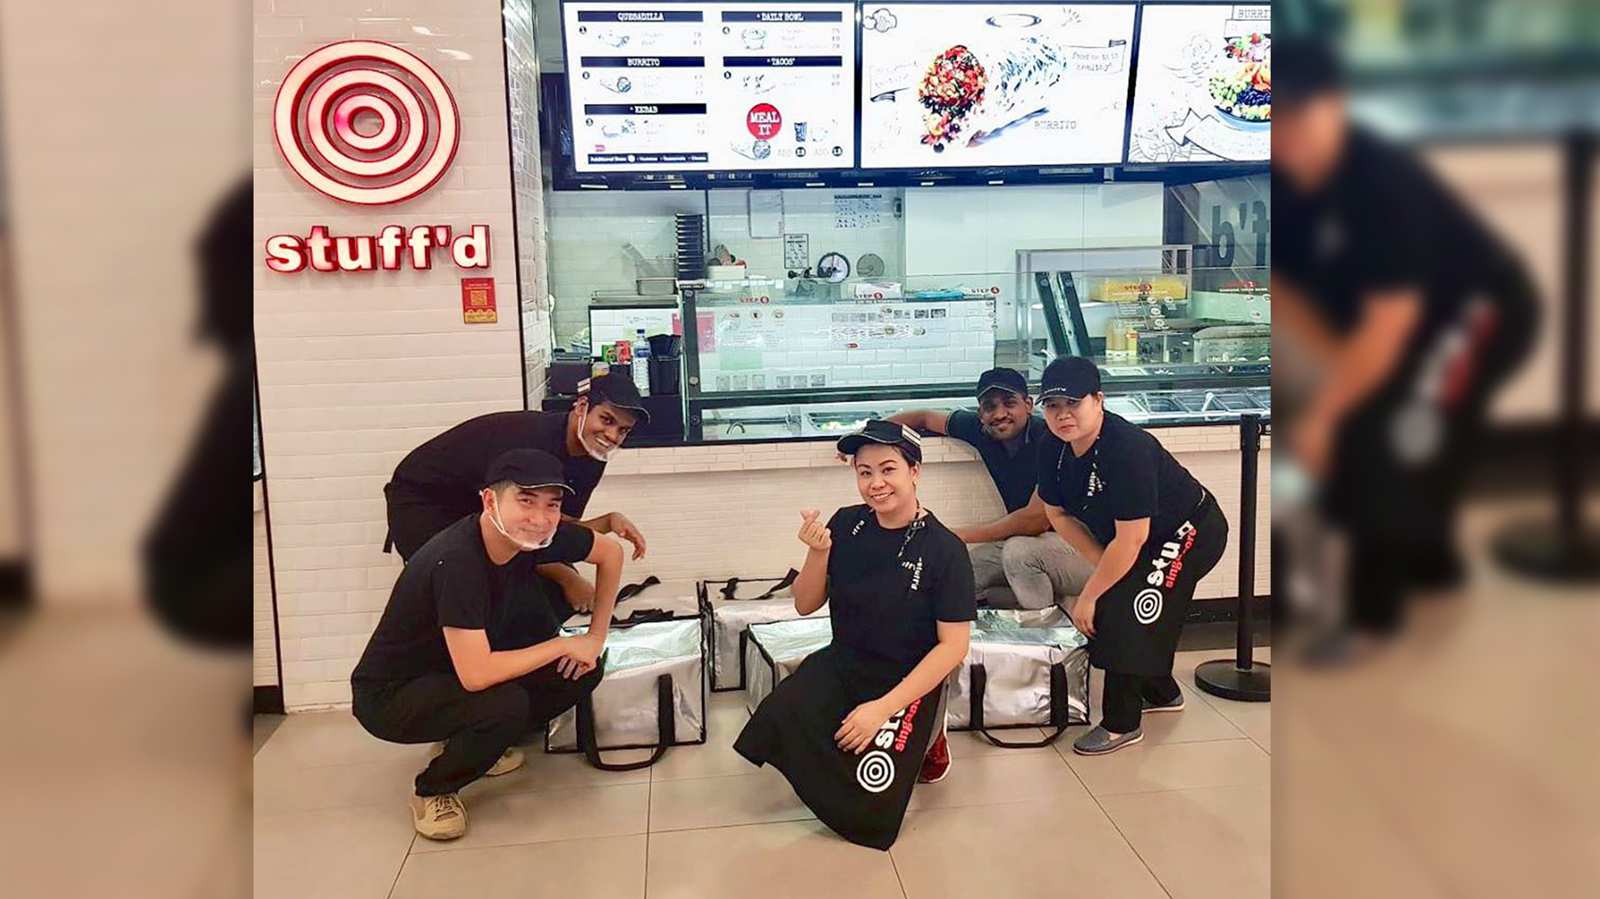 Amid competitive F&B landscape, Stuff’d expands programme to help hungry kids in Singapore